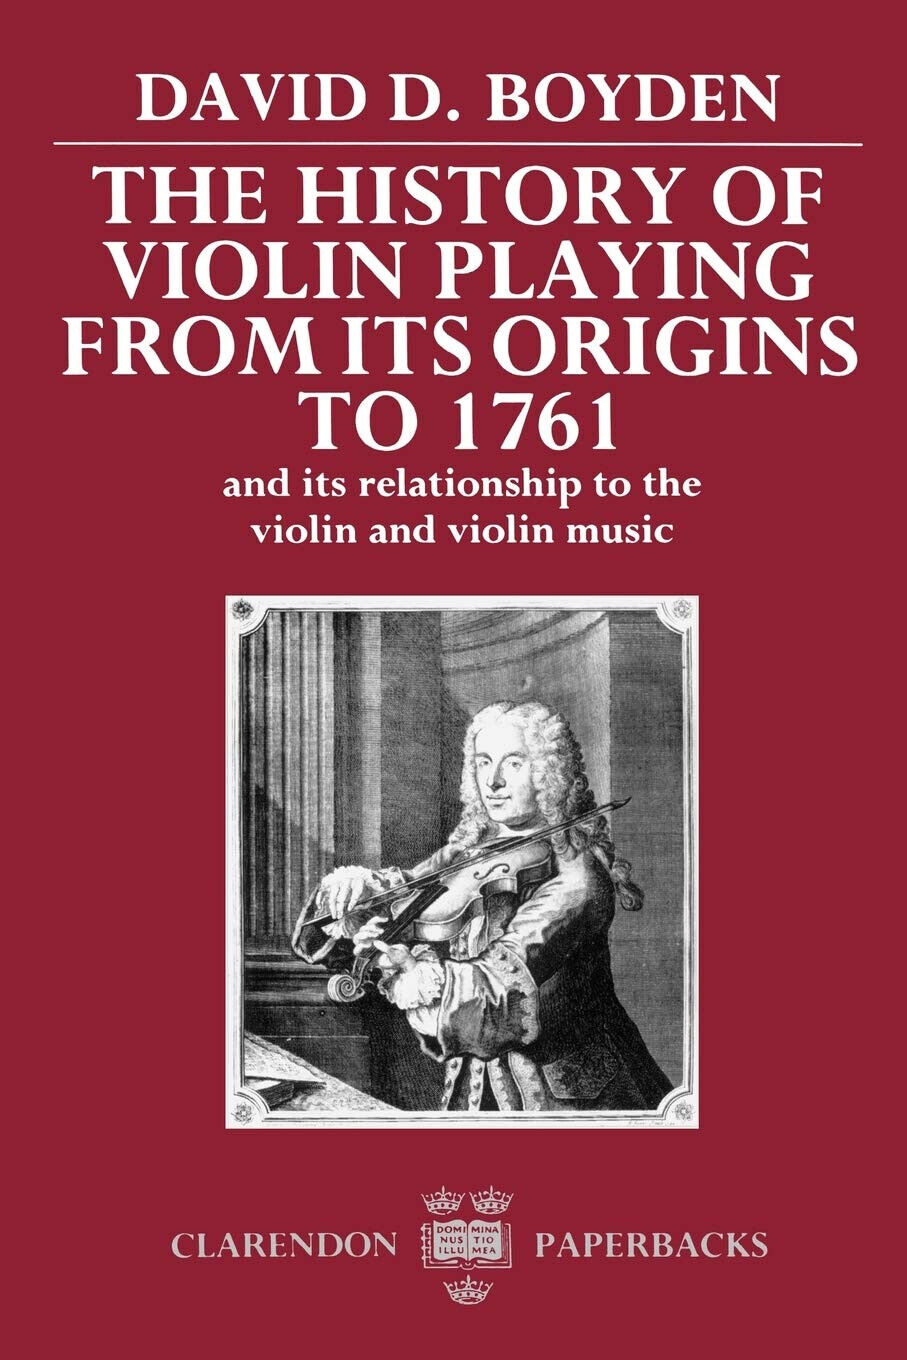 The History of Violin Playing from Its Origins to 1761 - David D. Boyden - 1990